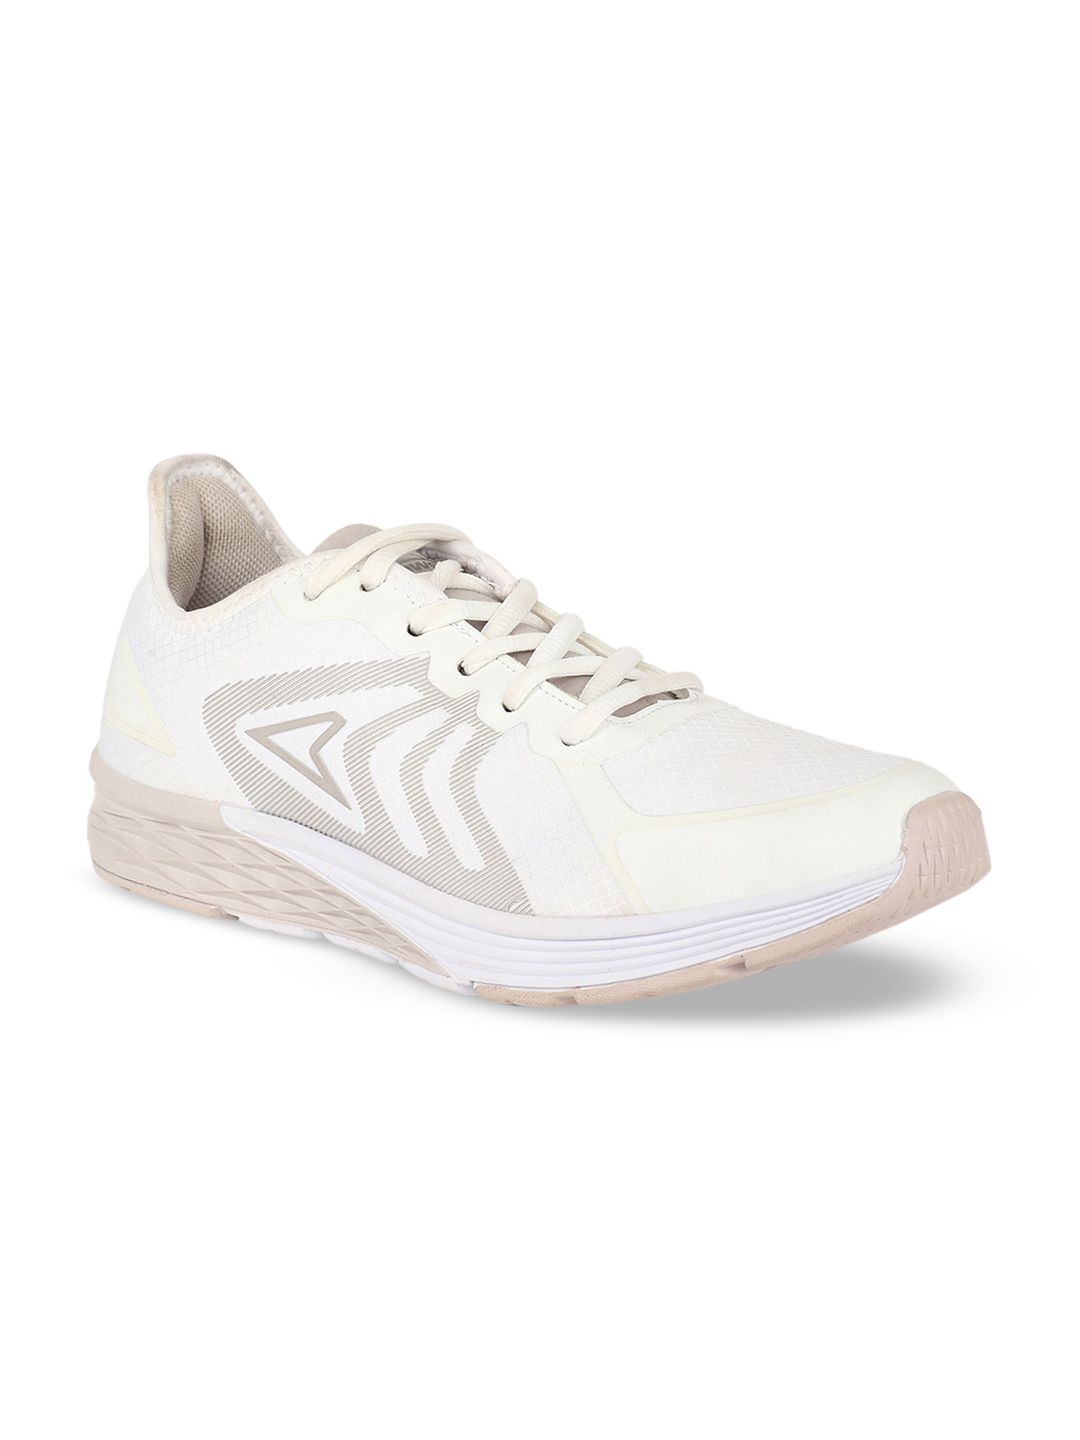 Power Women White Textile Running Shoes Price in India